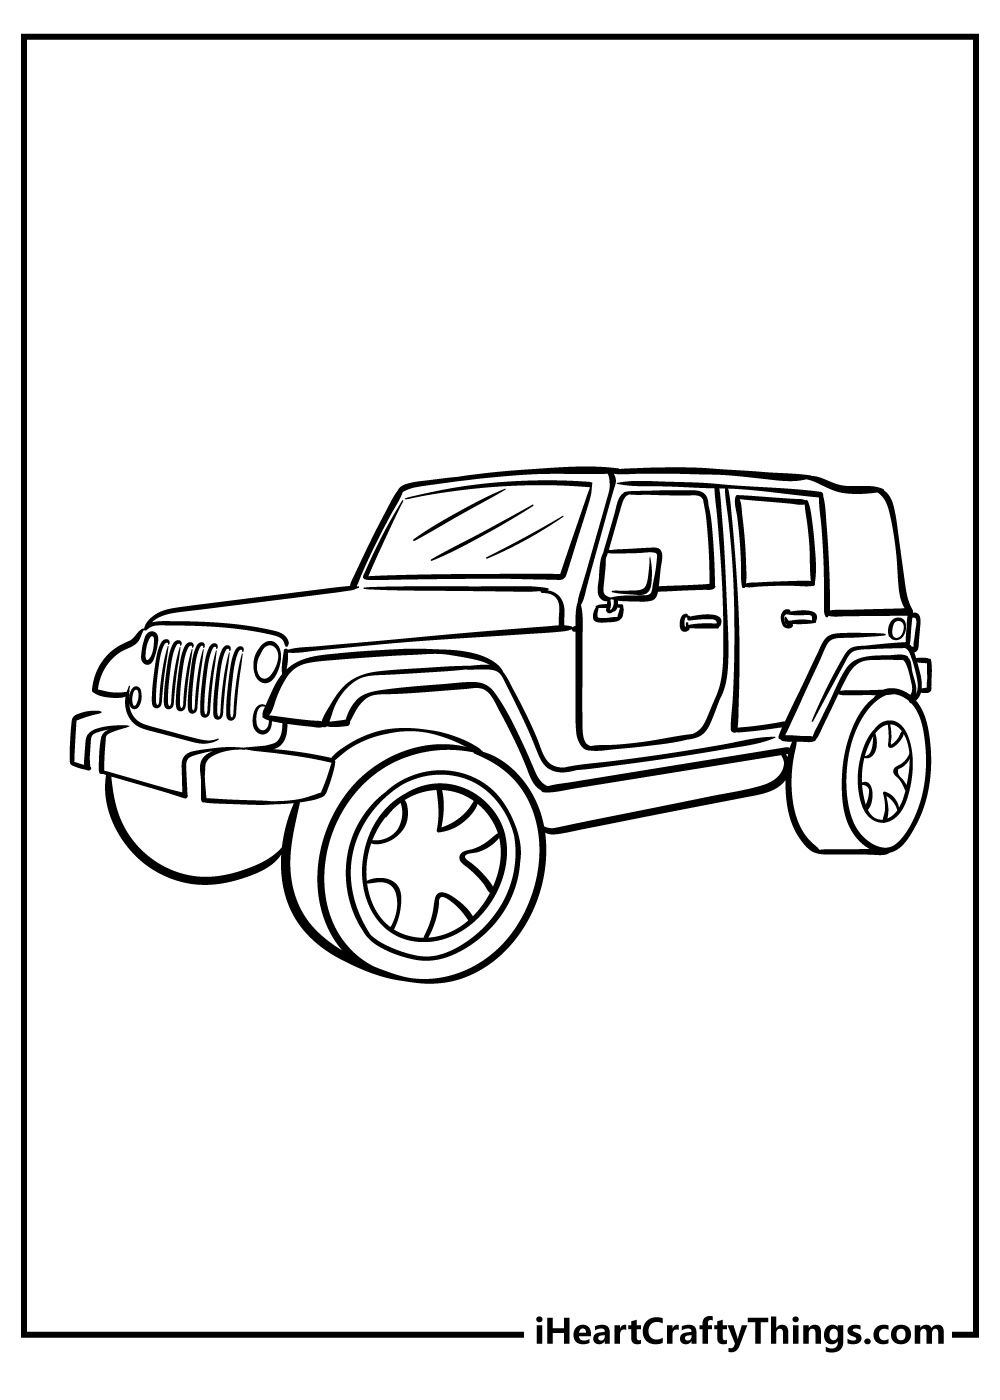 Jeep Coloring Original Sheet for children free download